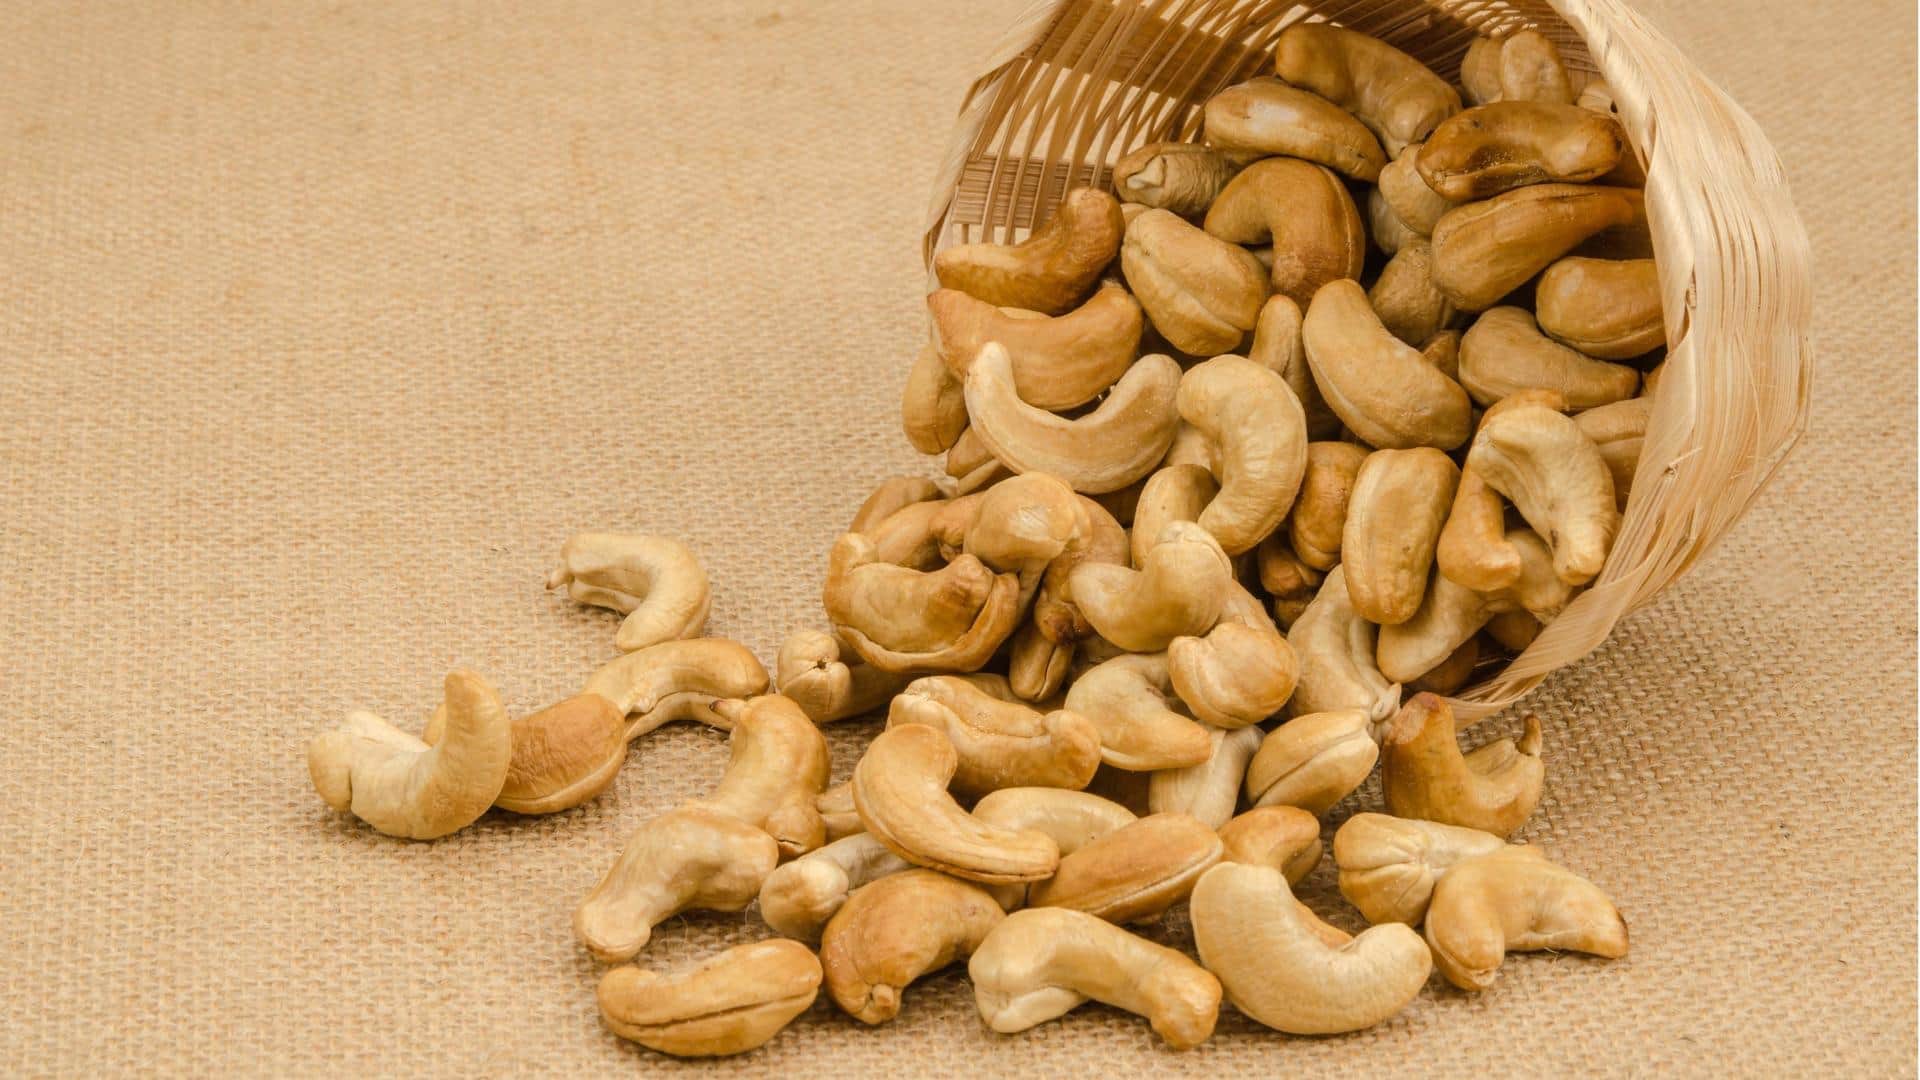 Try these 5 yummy recipes using cashews